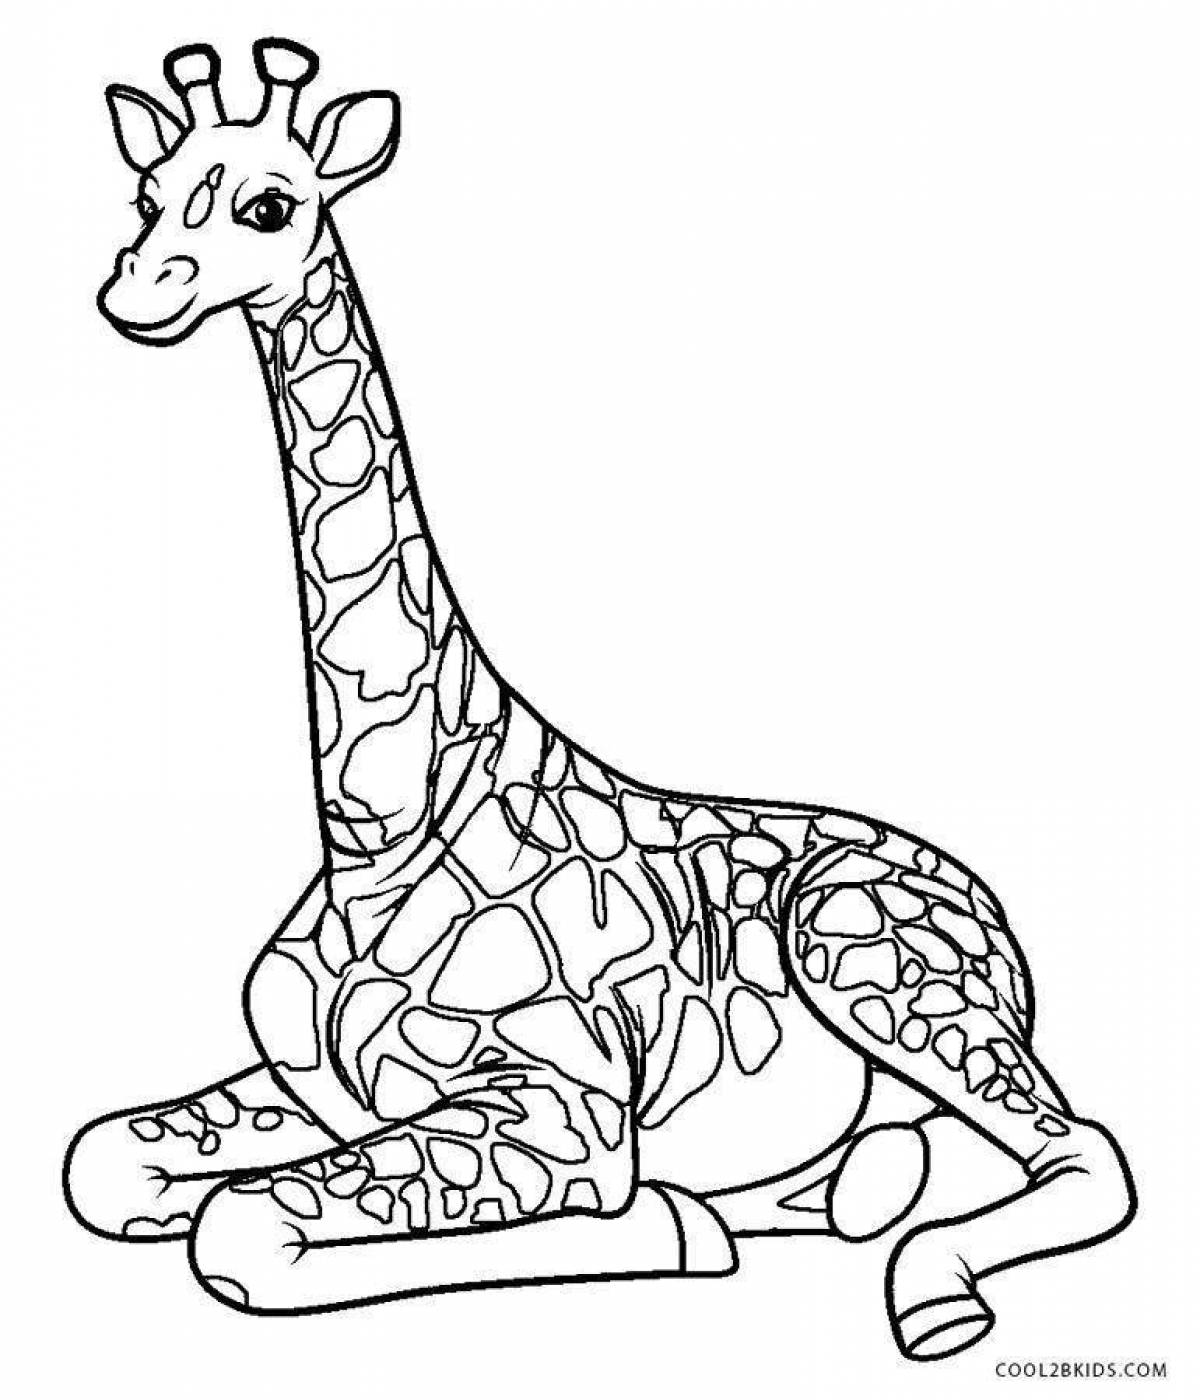 Adorable giraffe coloring page for 3-4 year olds